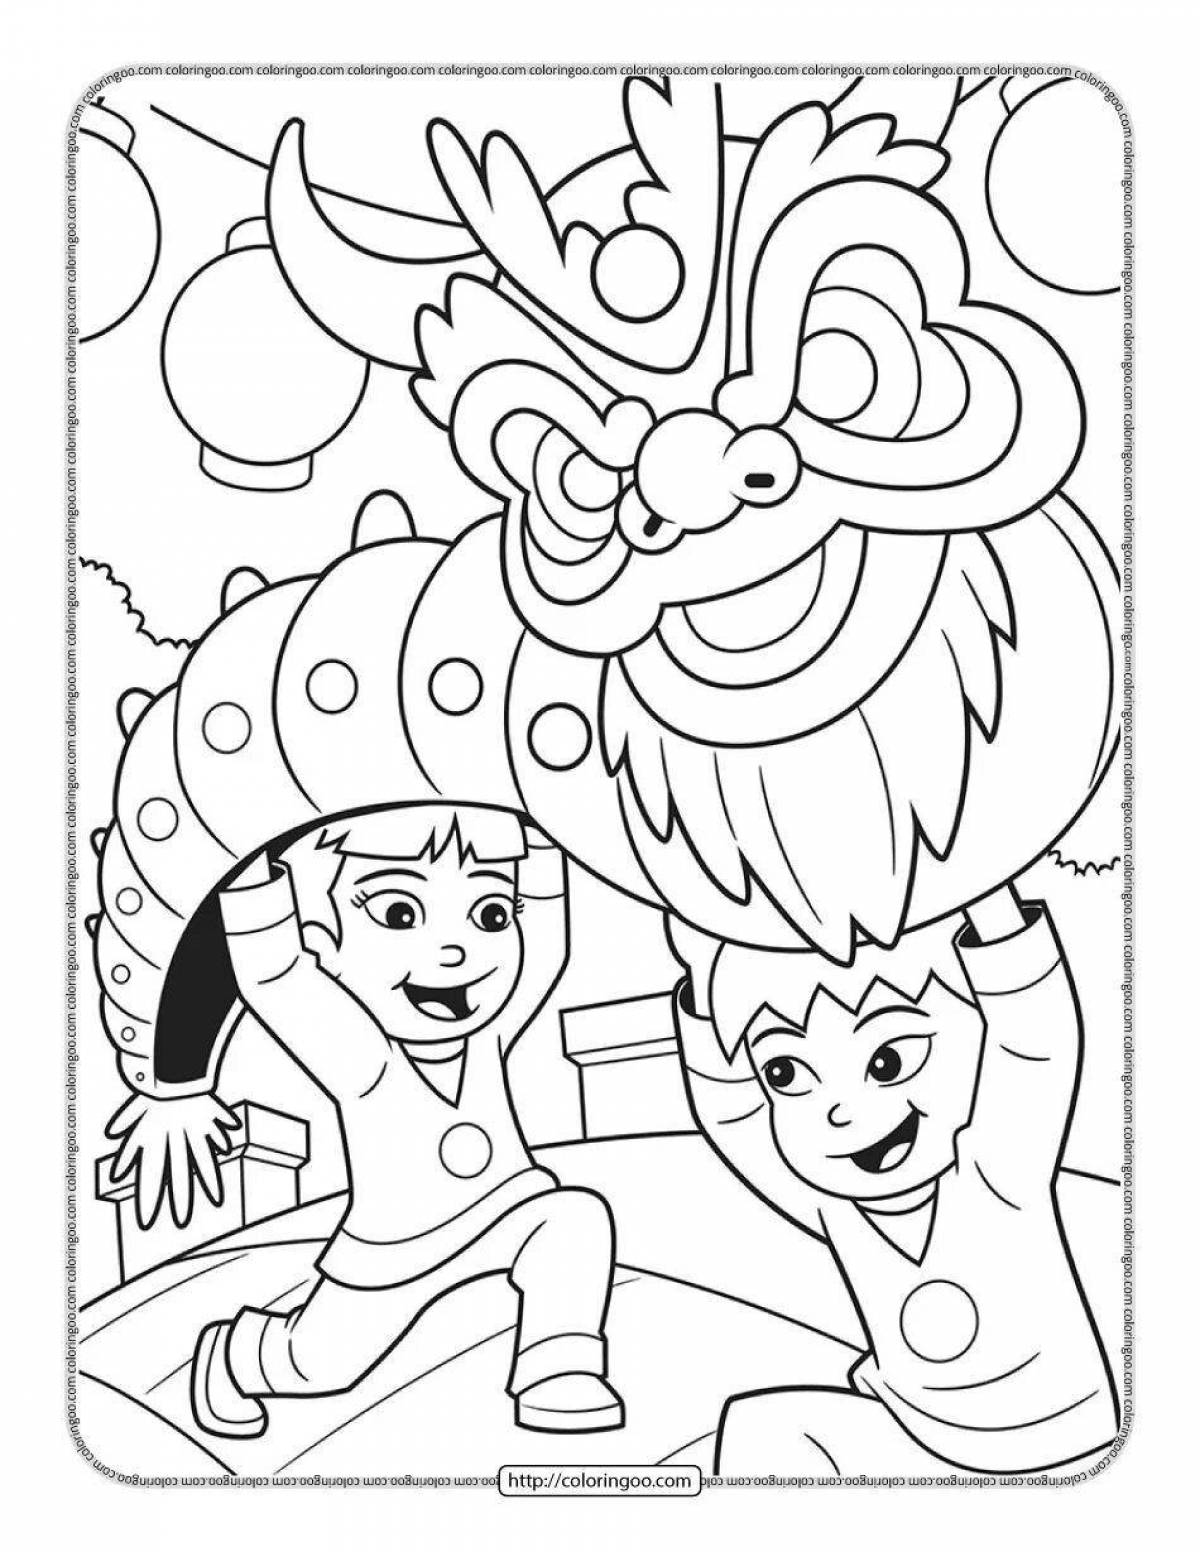 Fun Chinese New Year coloring book for kids